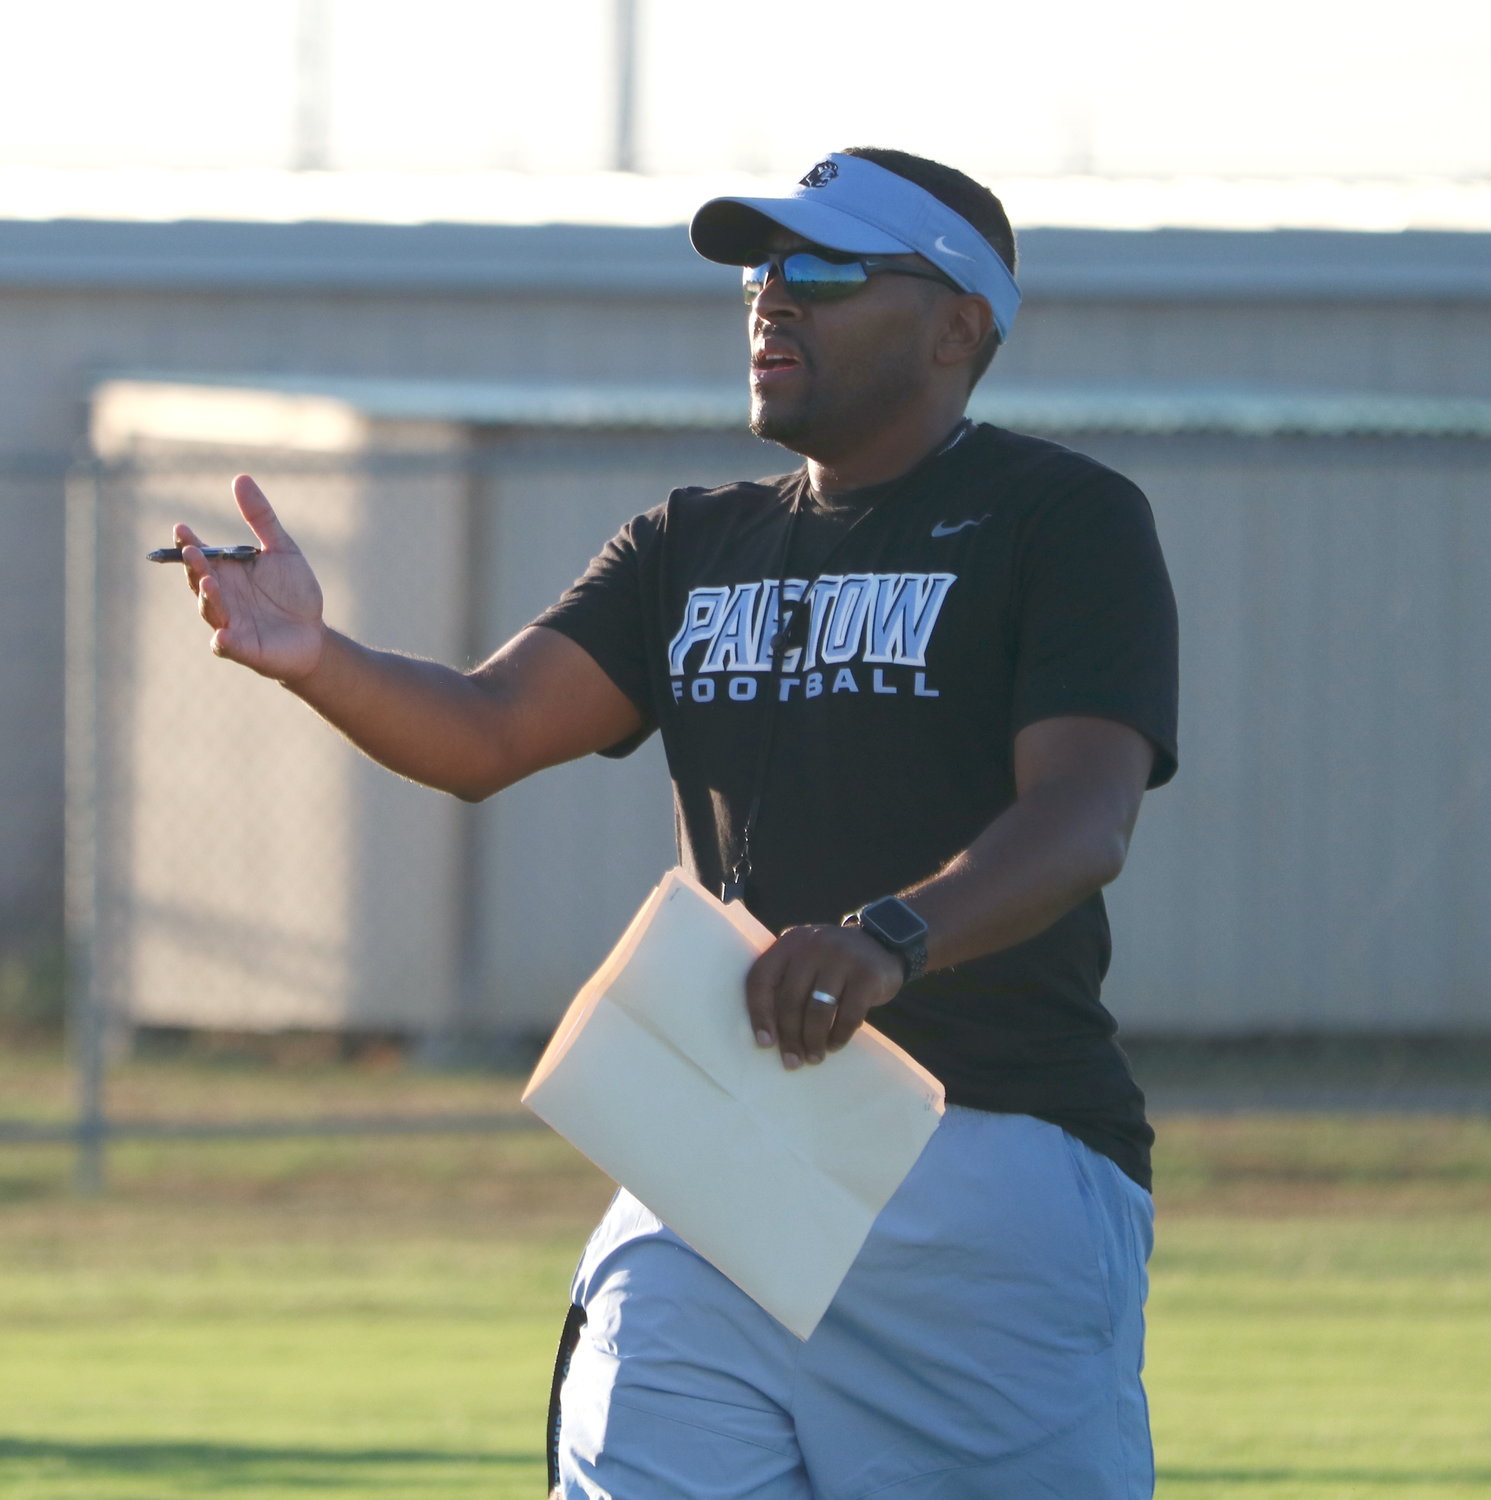 Paetow head coach Lonnie Teagle coaches during Paetow’s practice on Monday morning.